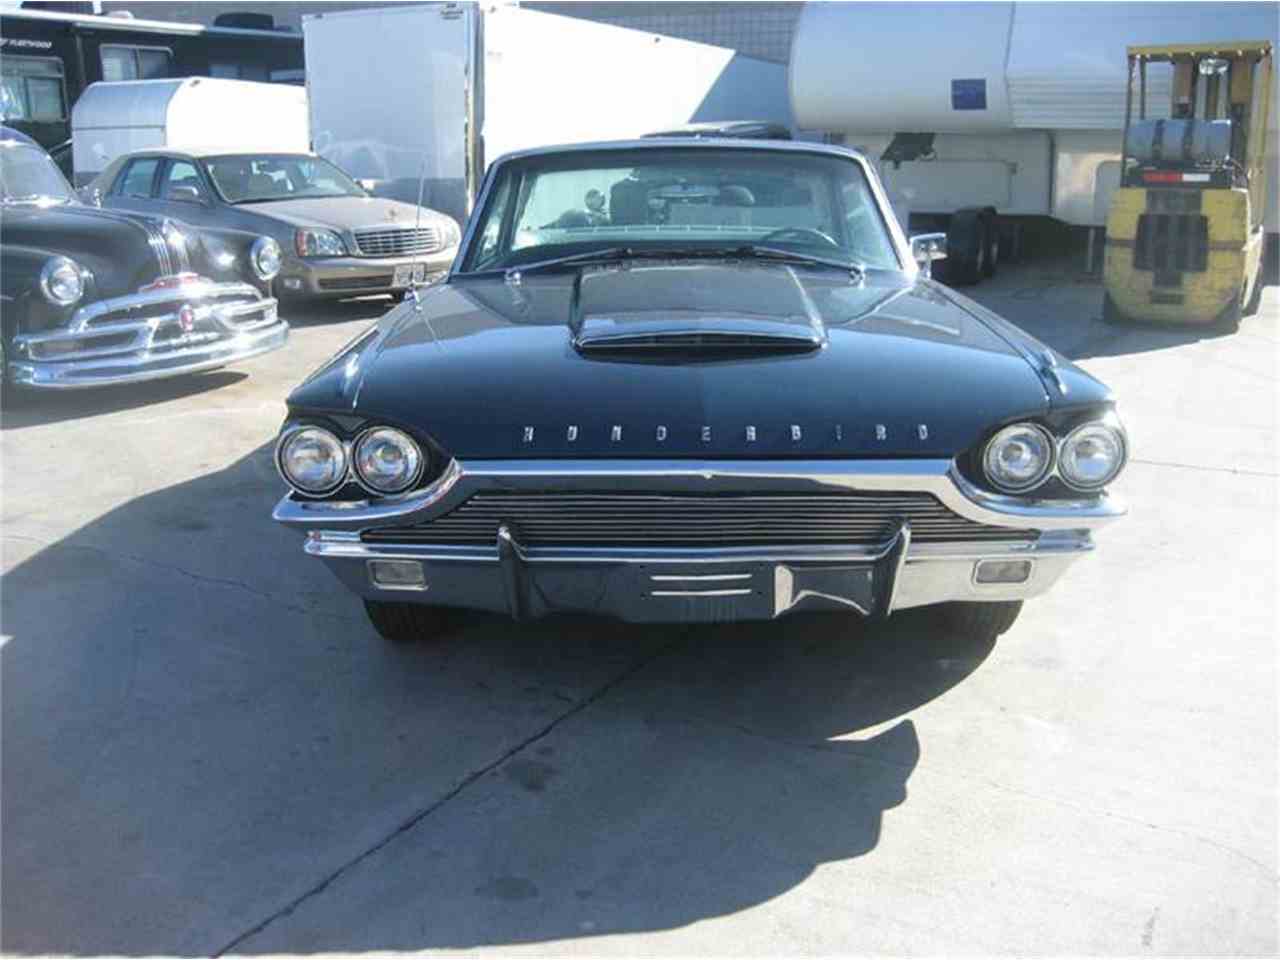 64 t bird for sale